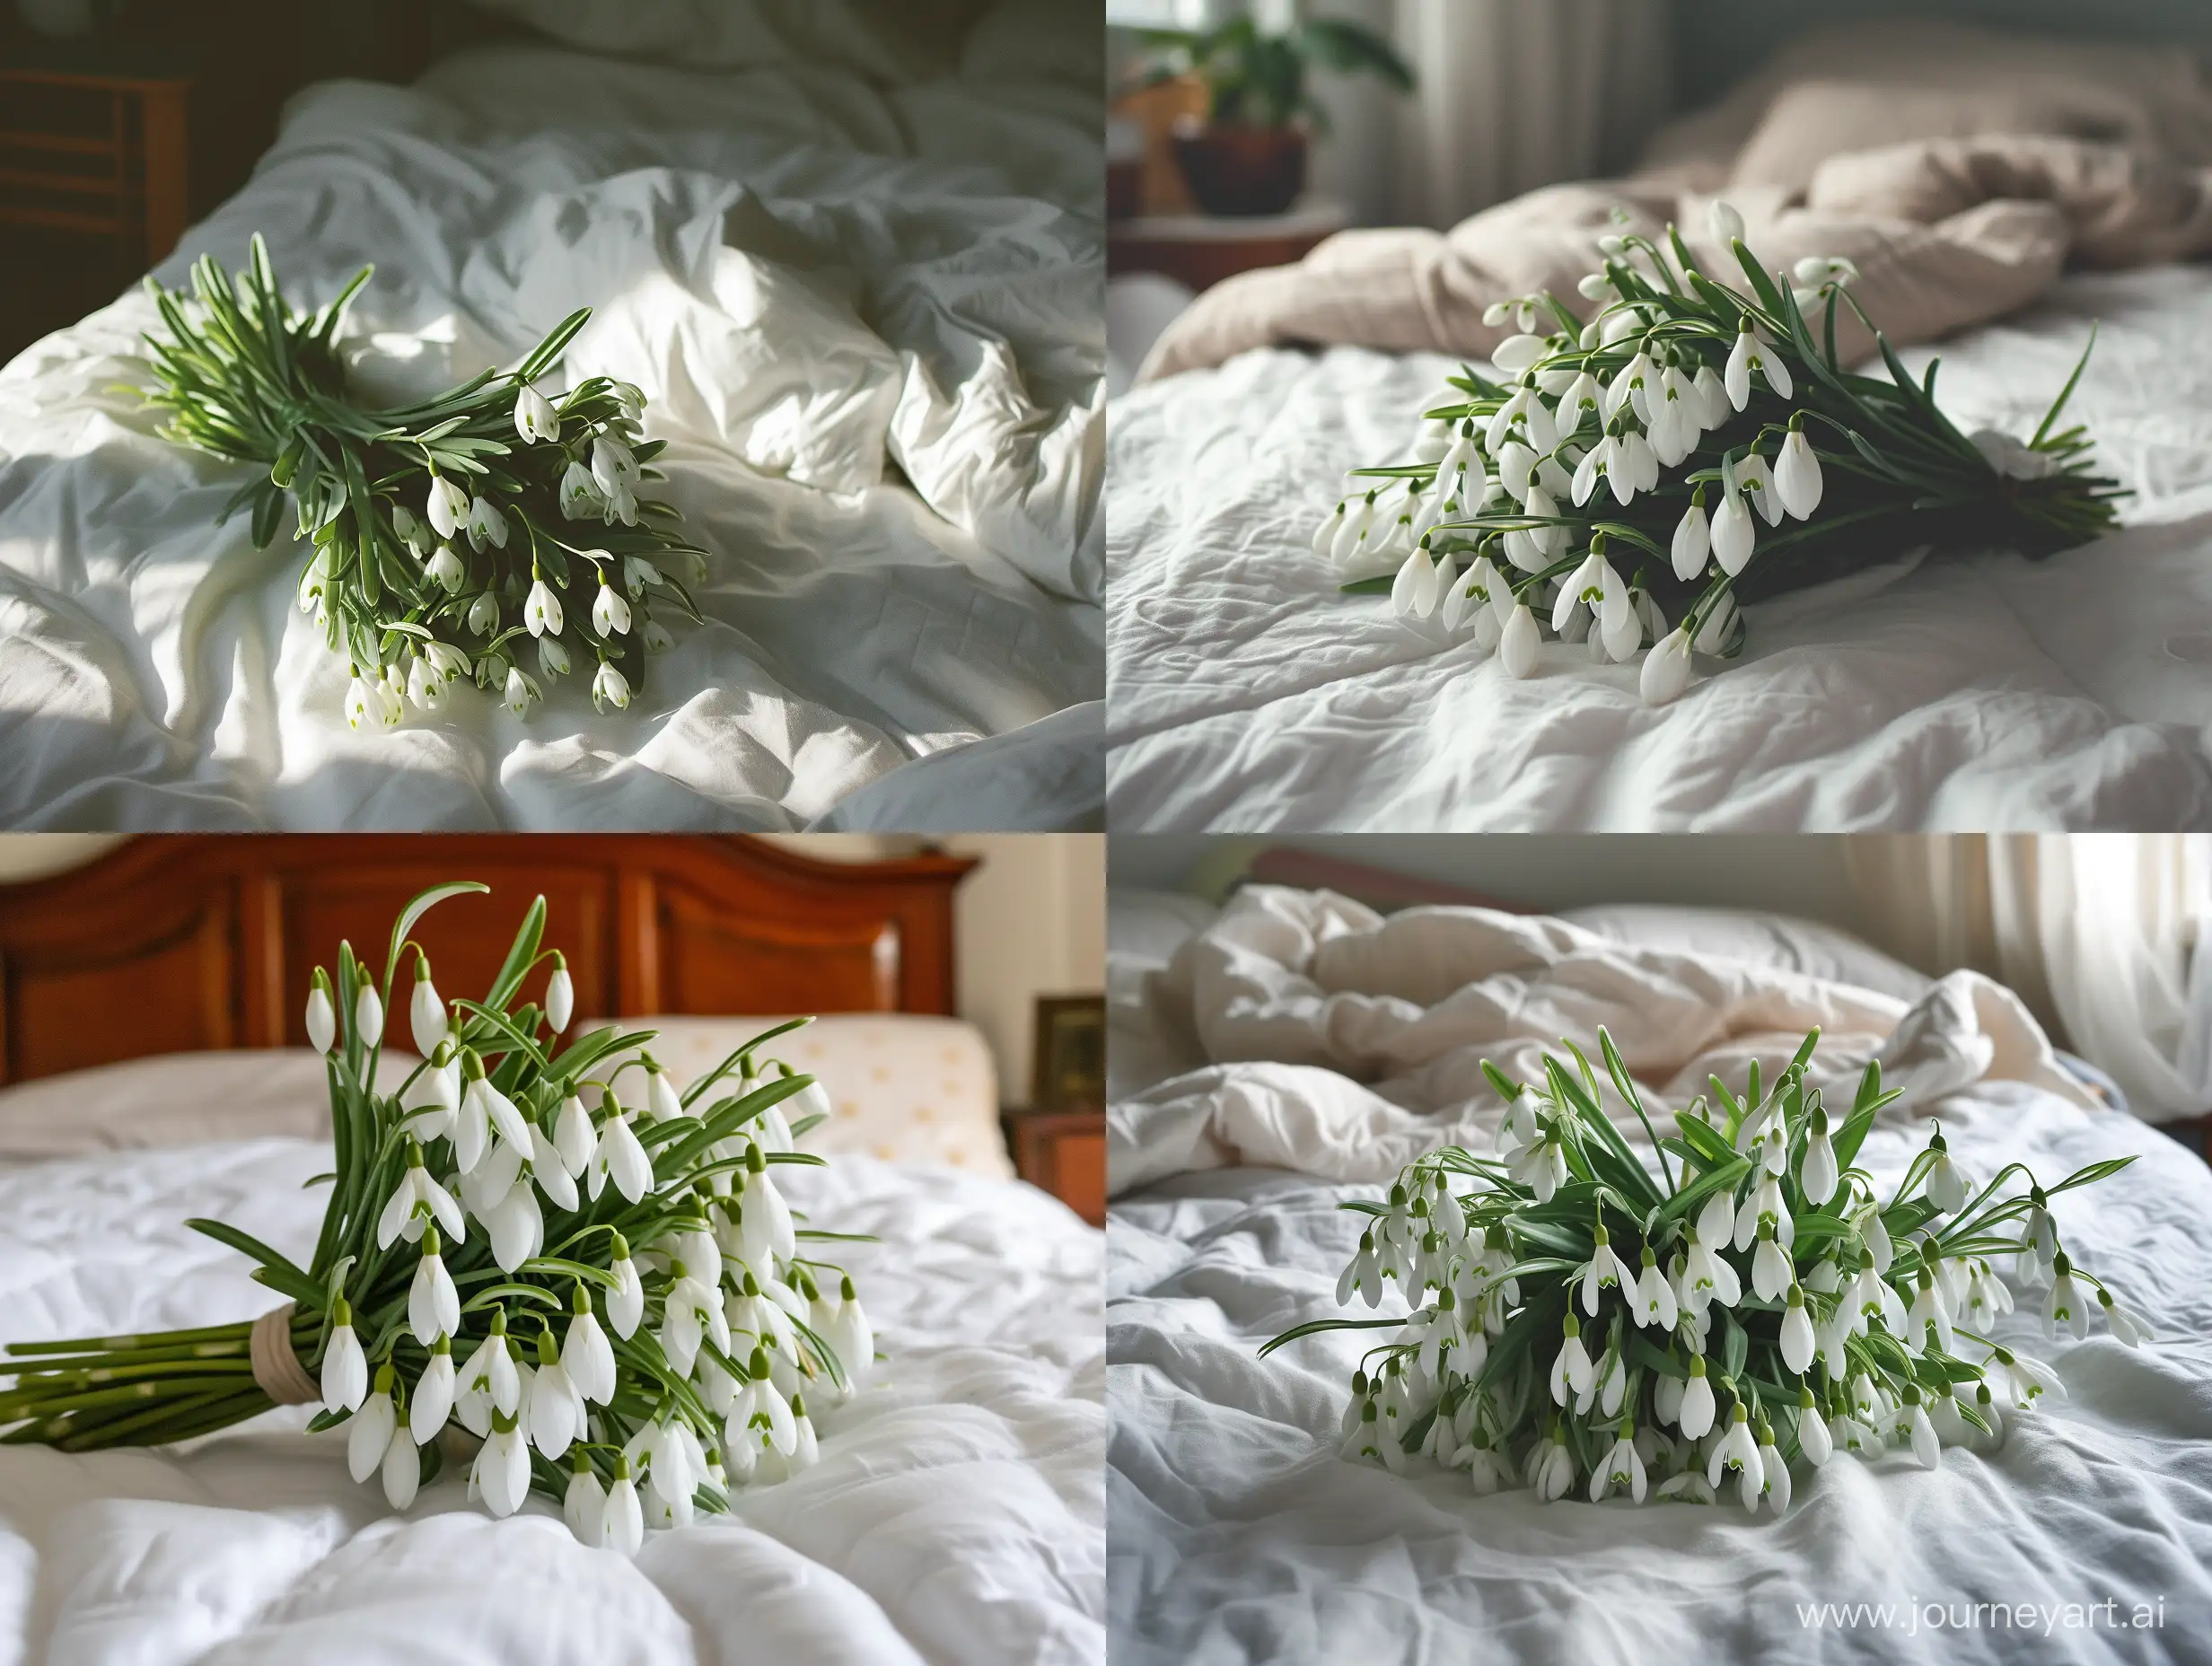 Snowdrop-Bouquet-on-Bed-Fresh-White-Flowers-in-Bedroom-Setting